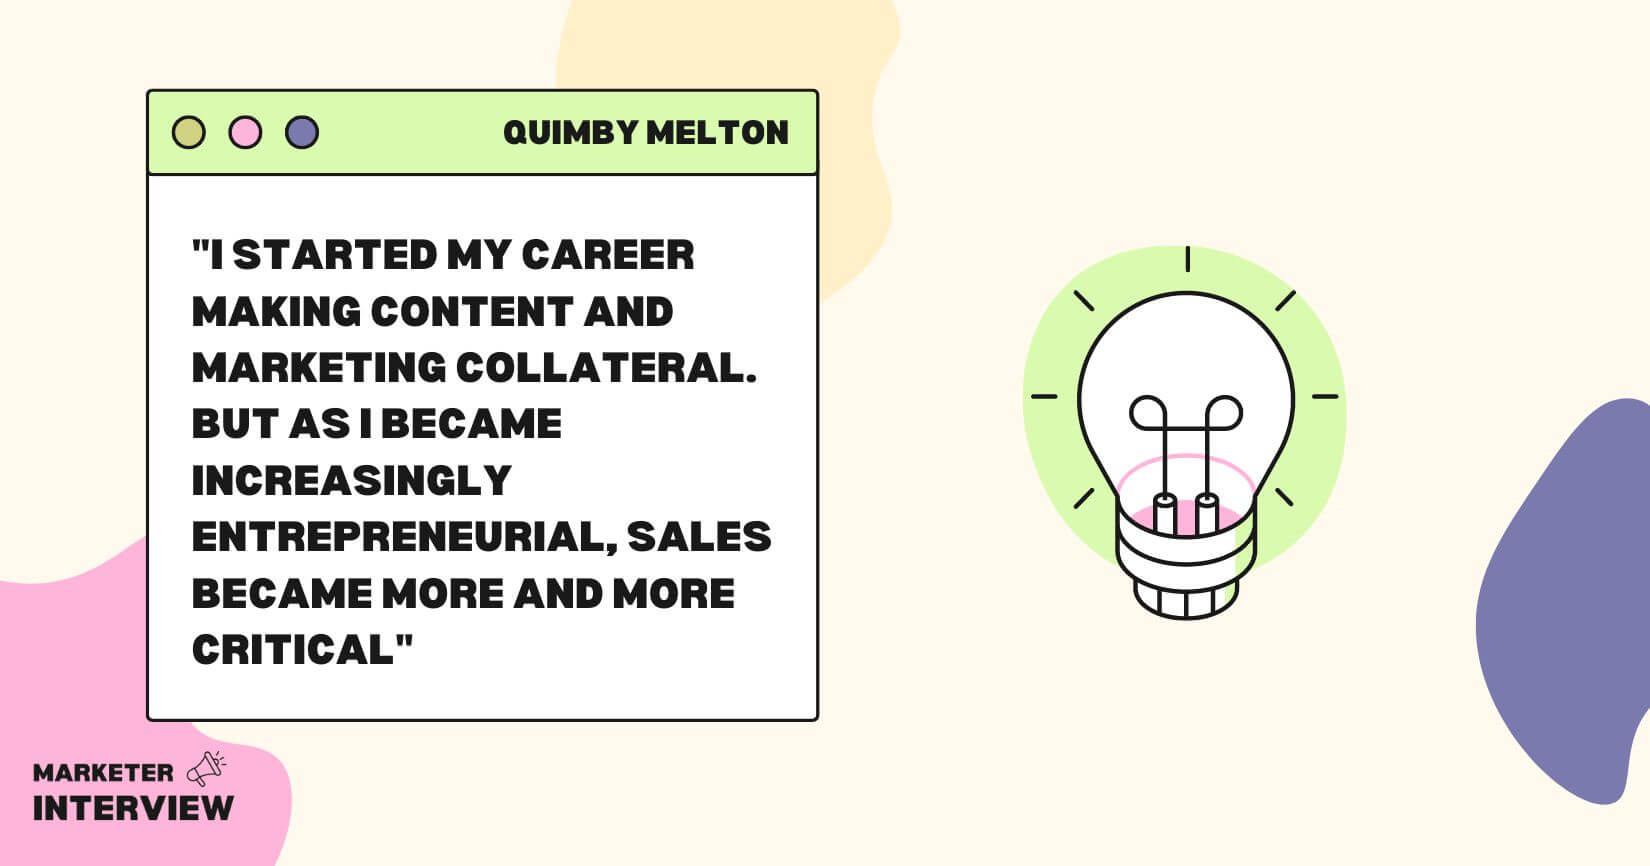 word image 1789 2 The Science of Marketing Operations: An Interview with Quimby Melton